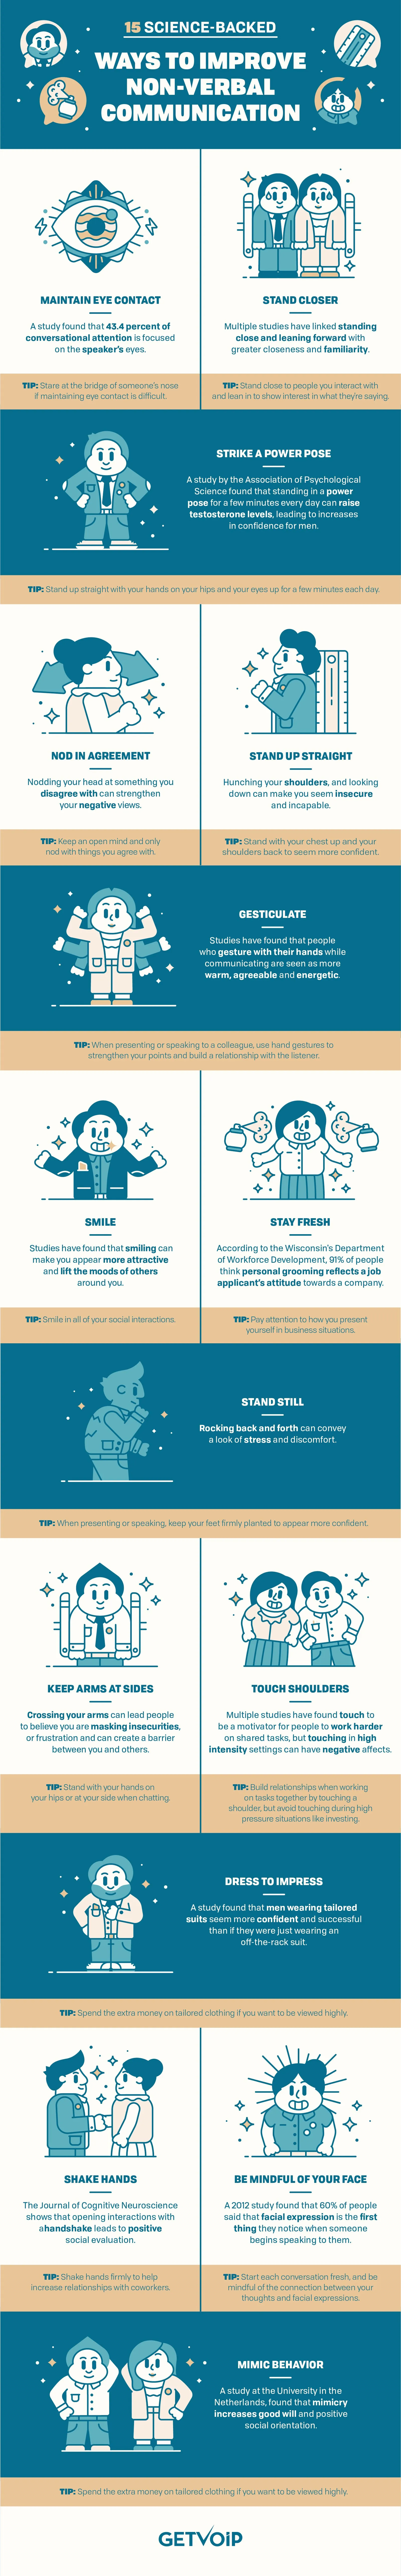 15 Science-Backed Ways to Improve Non-Verbal Communication - #infographic